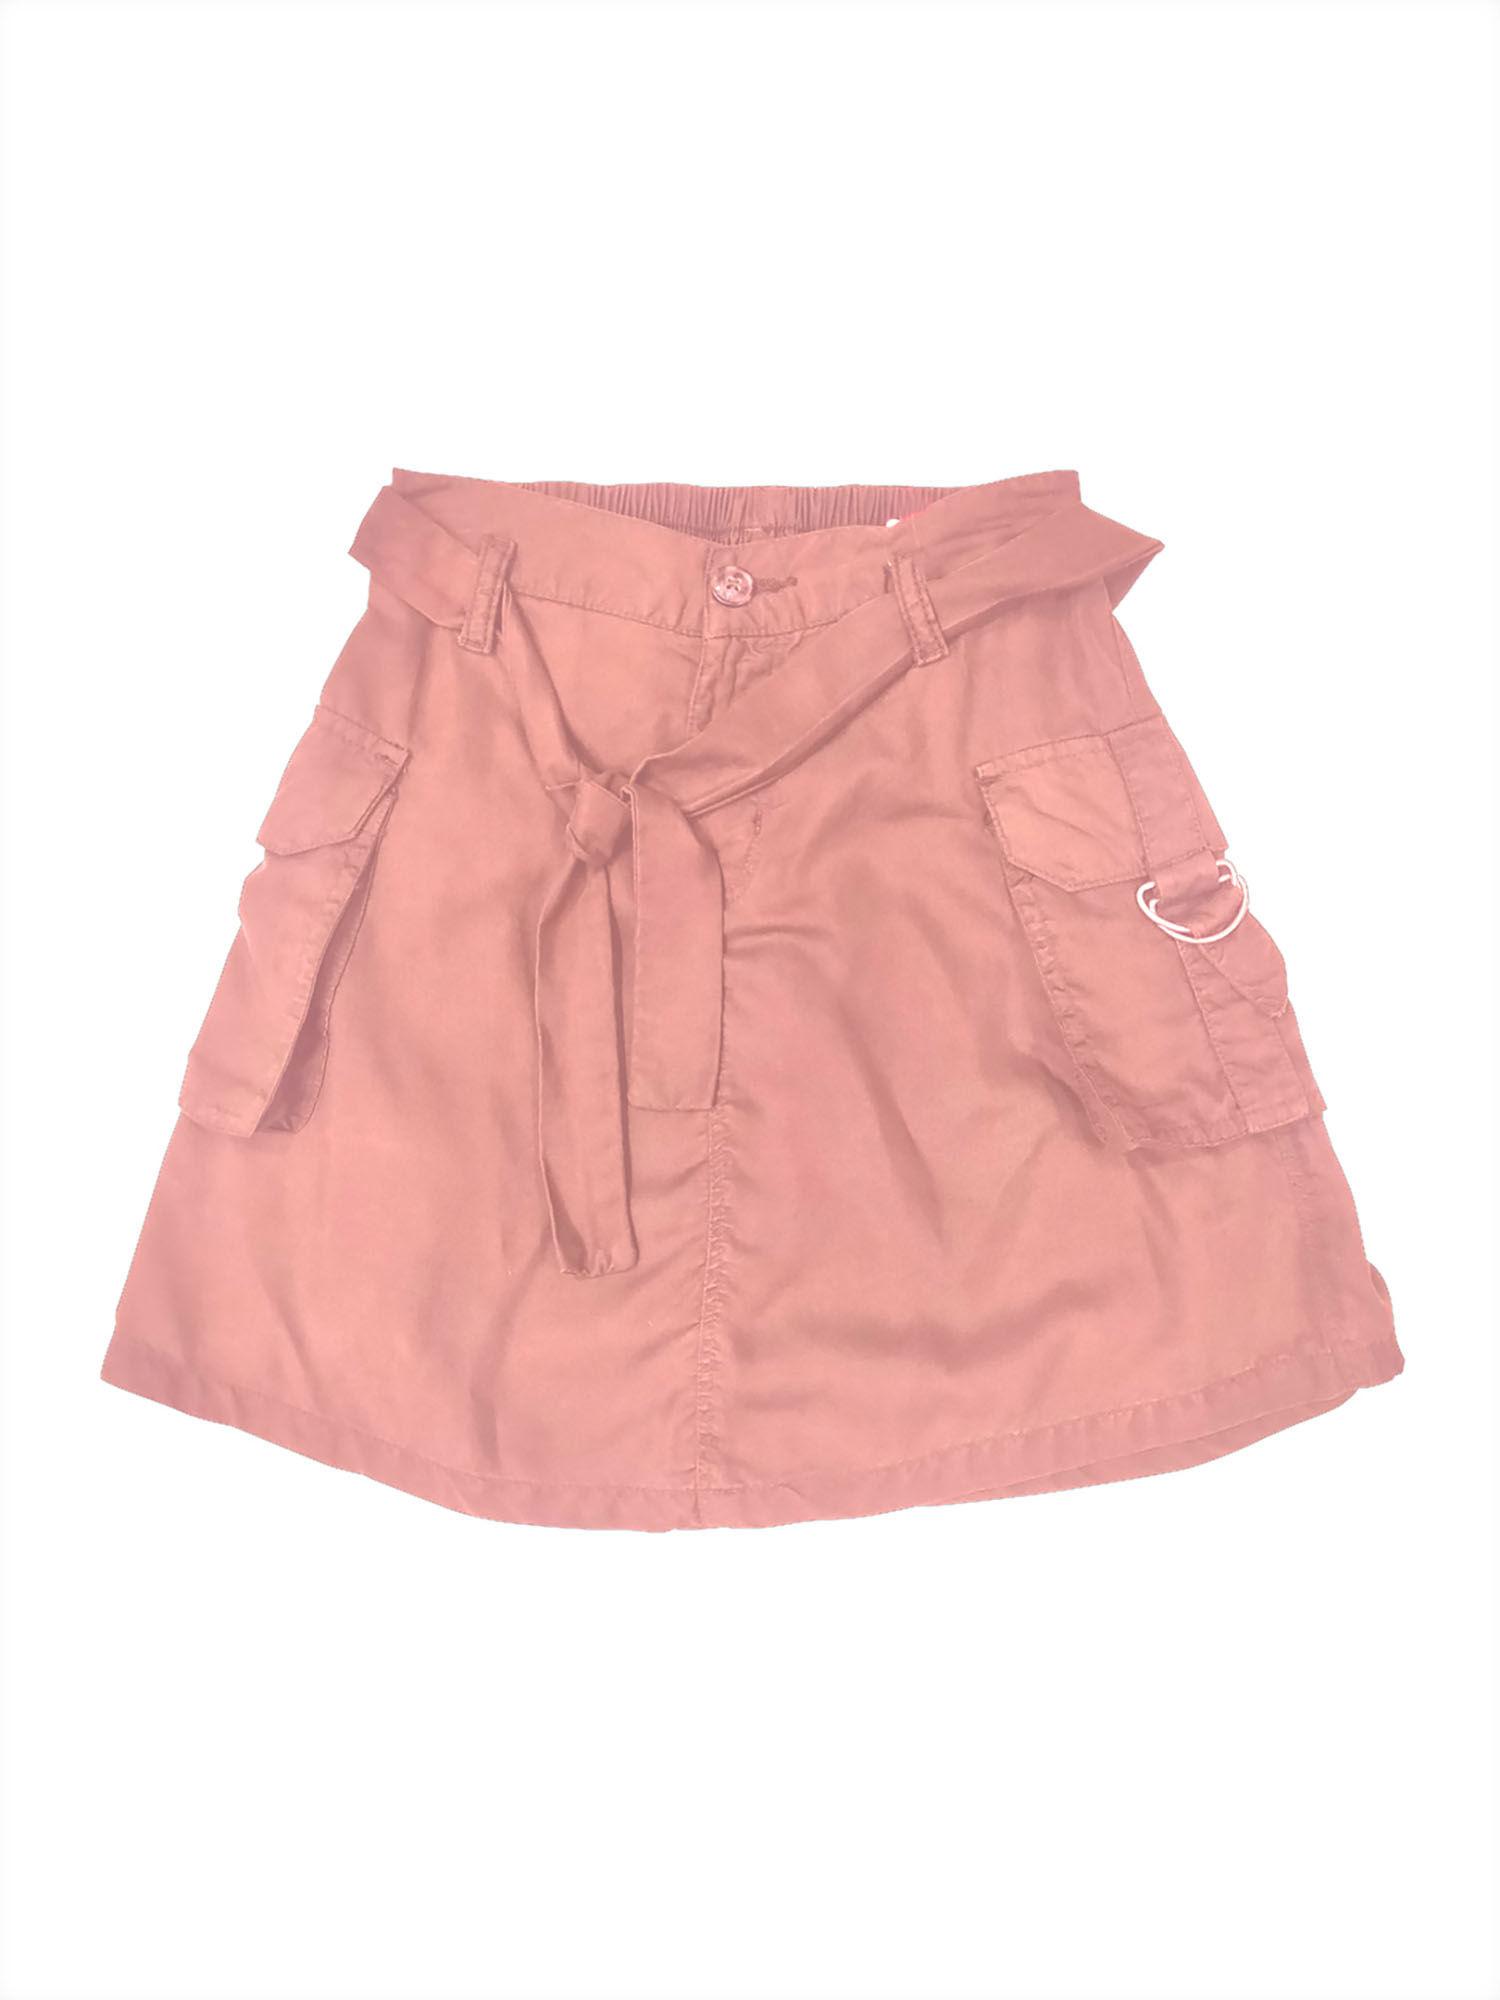 pink solid/plain skirts